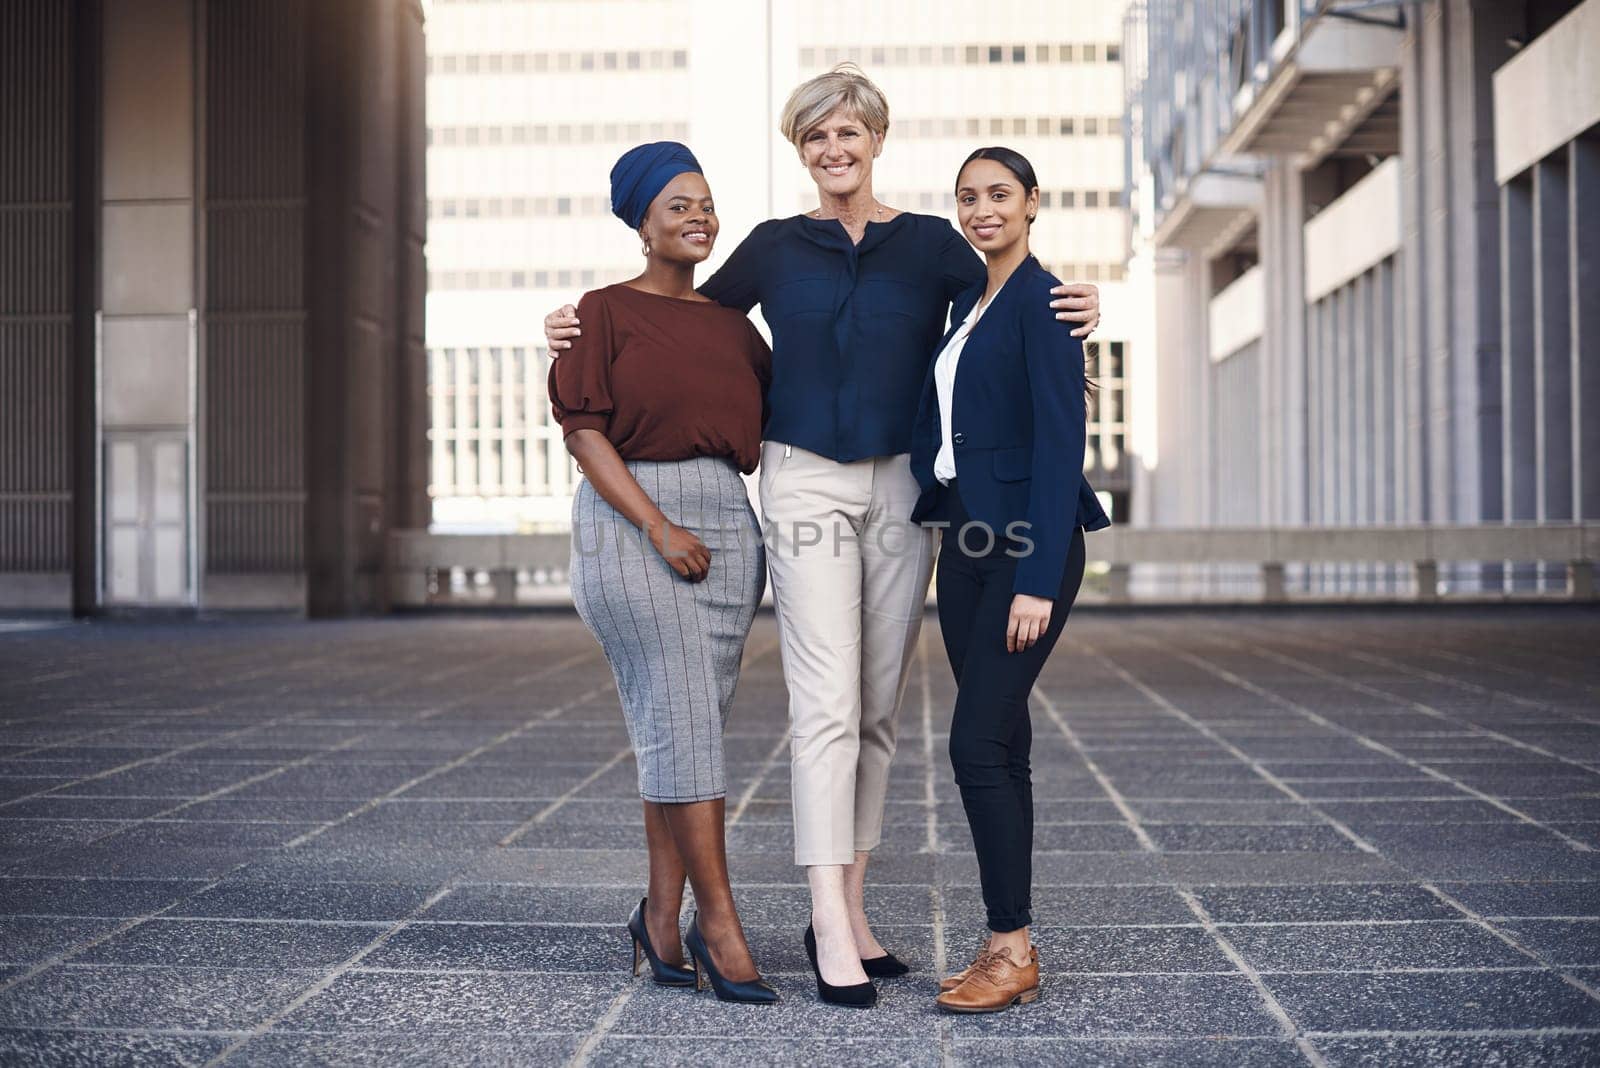 Our team is our source of strength. Portrait of a group of businesswomen standing together against a city background. by YuriArcurs